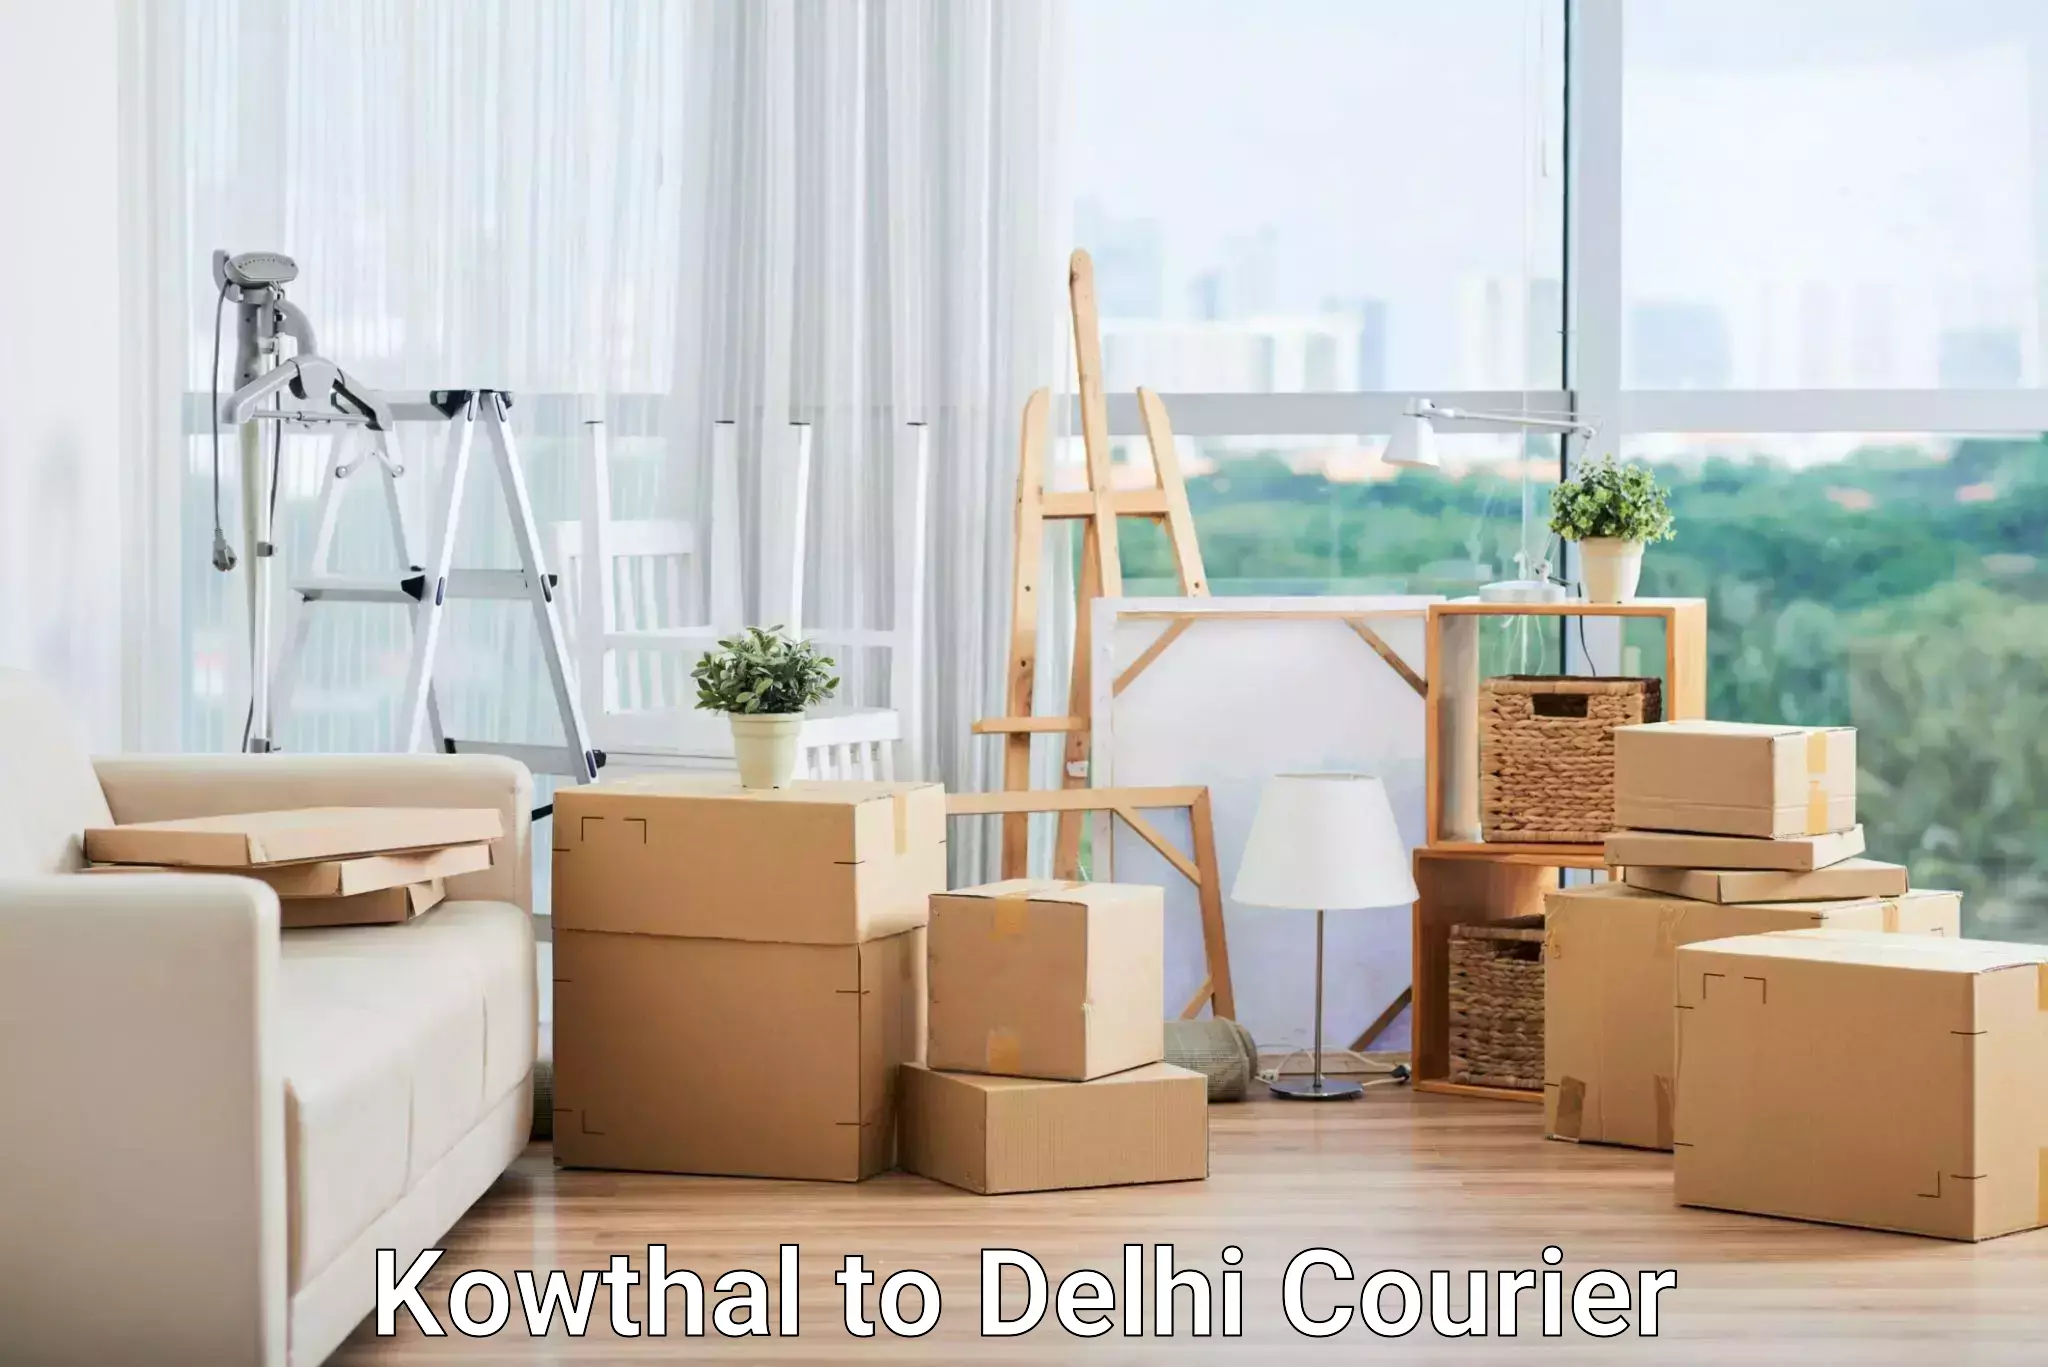 Enhanced tracking features in Kowthal to Delhi